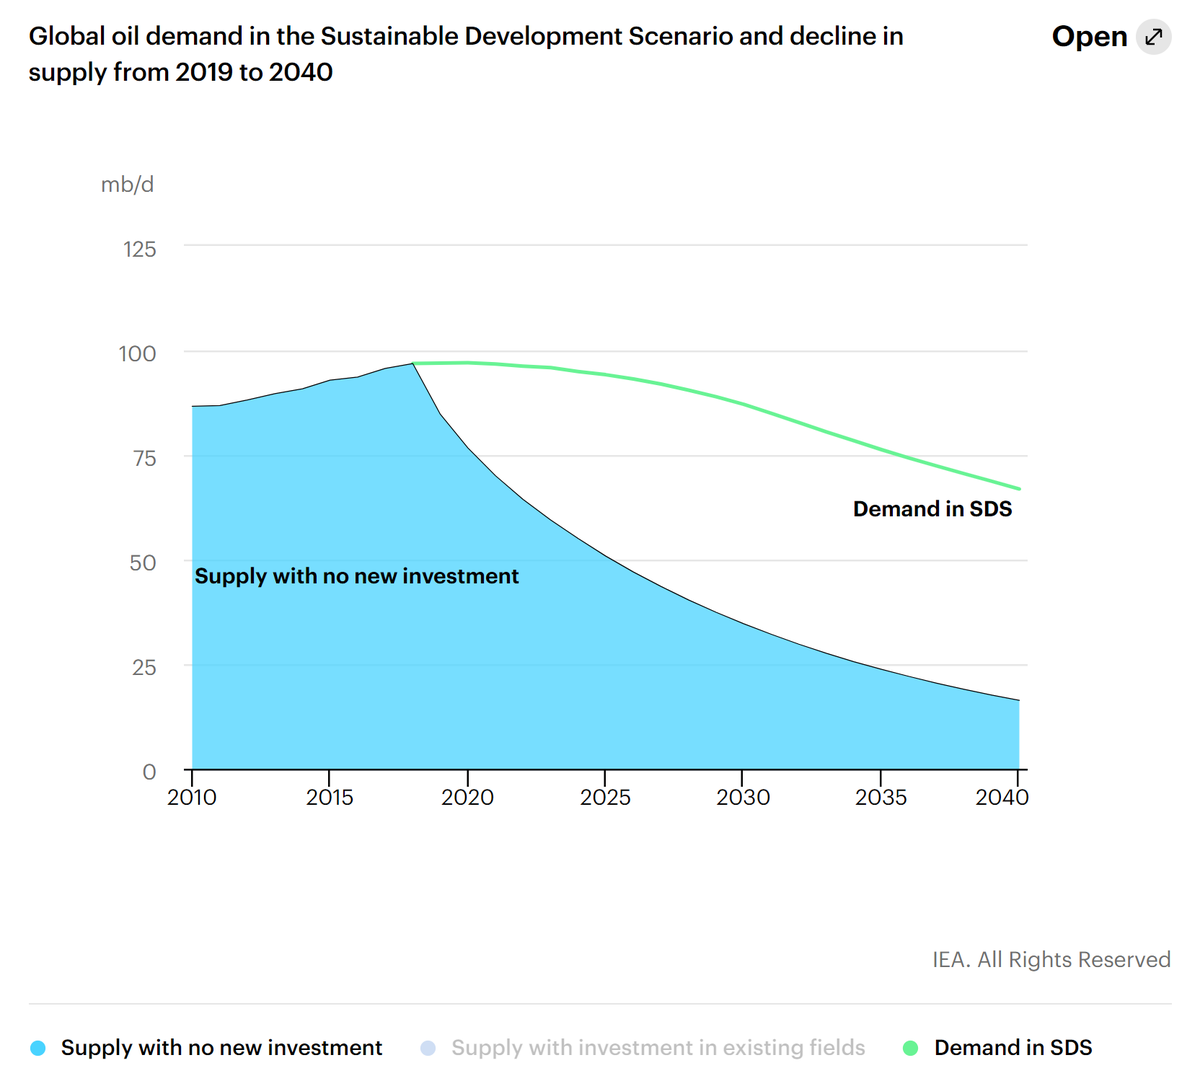 3/This means that even in scenarios where we have hit peak demand, like the IEA Sustainable Development Scenario, new oil investment is needed. This is one of the O&G industry’s key talking points. https://www.iea.org/reports/the-oil-and-gas-industry-in-energy-transitions